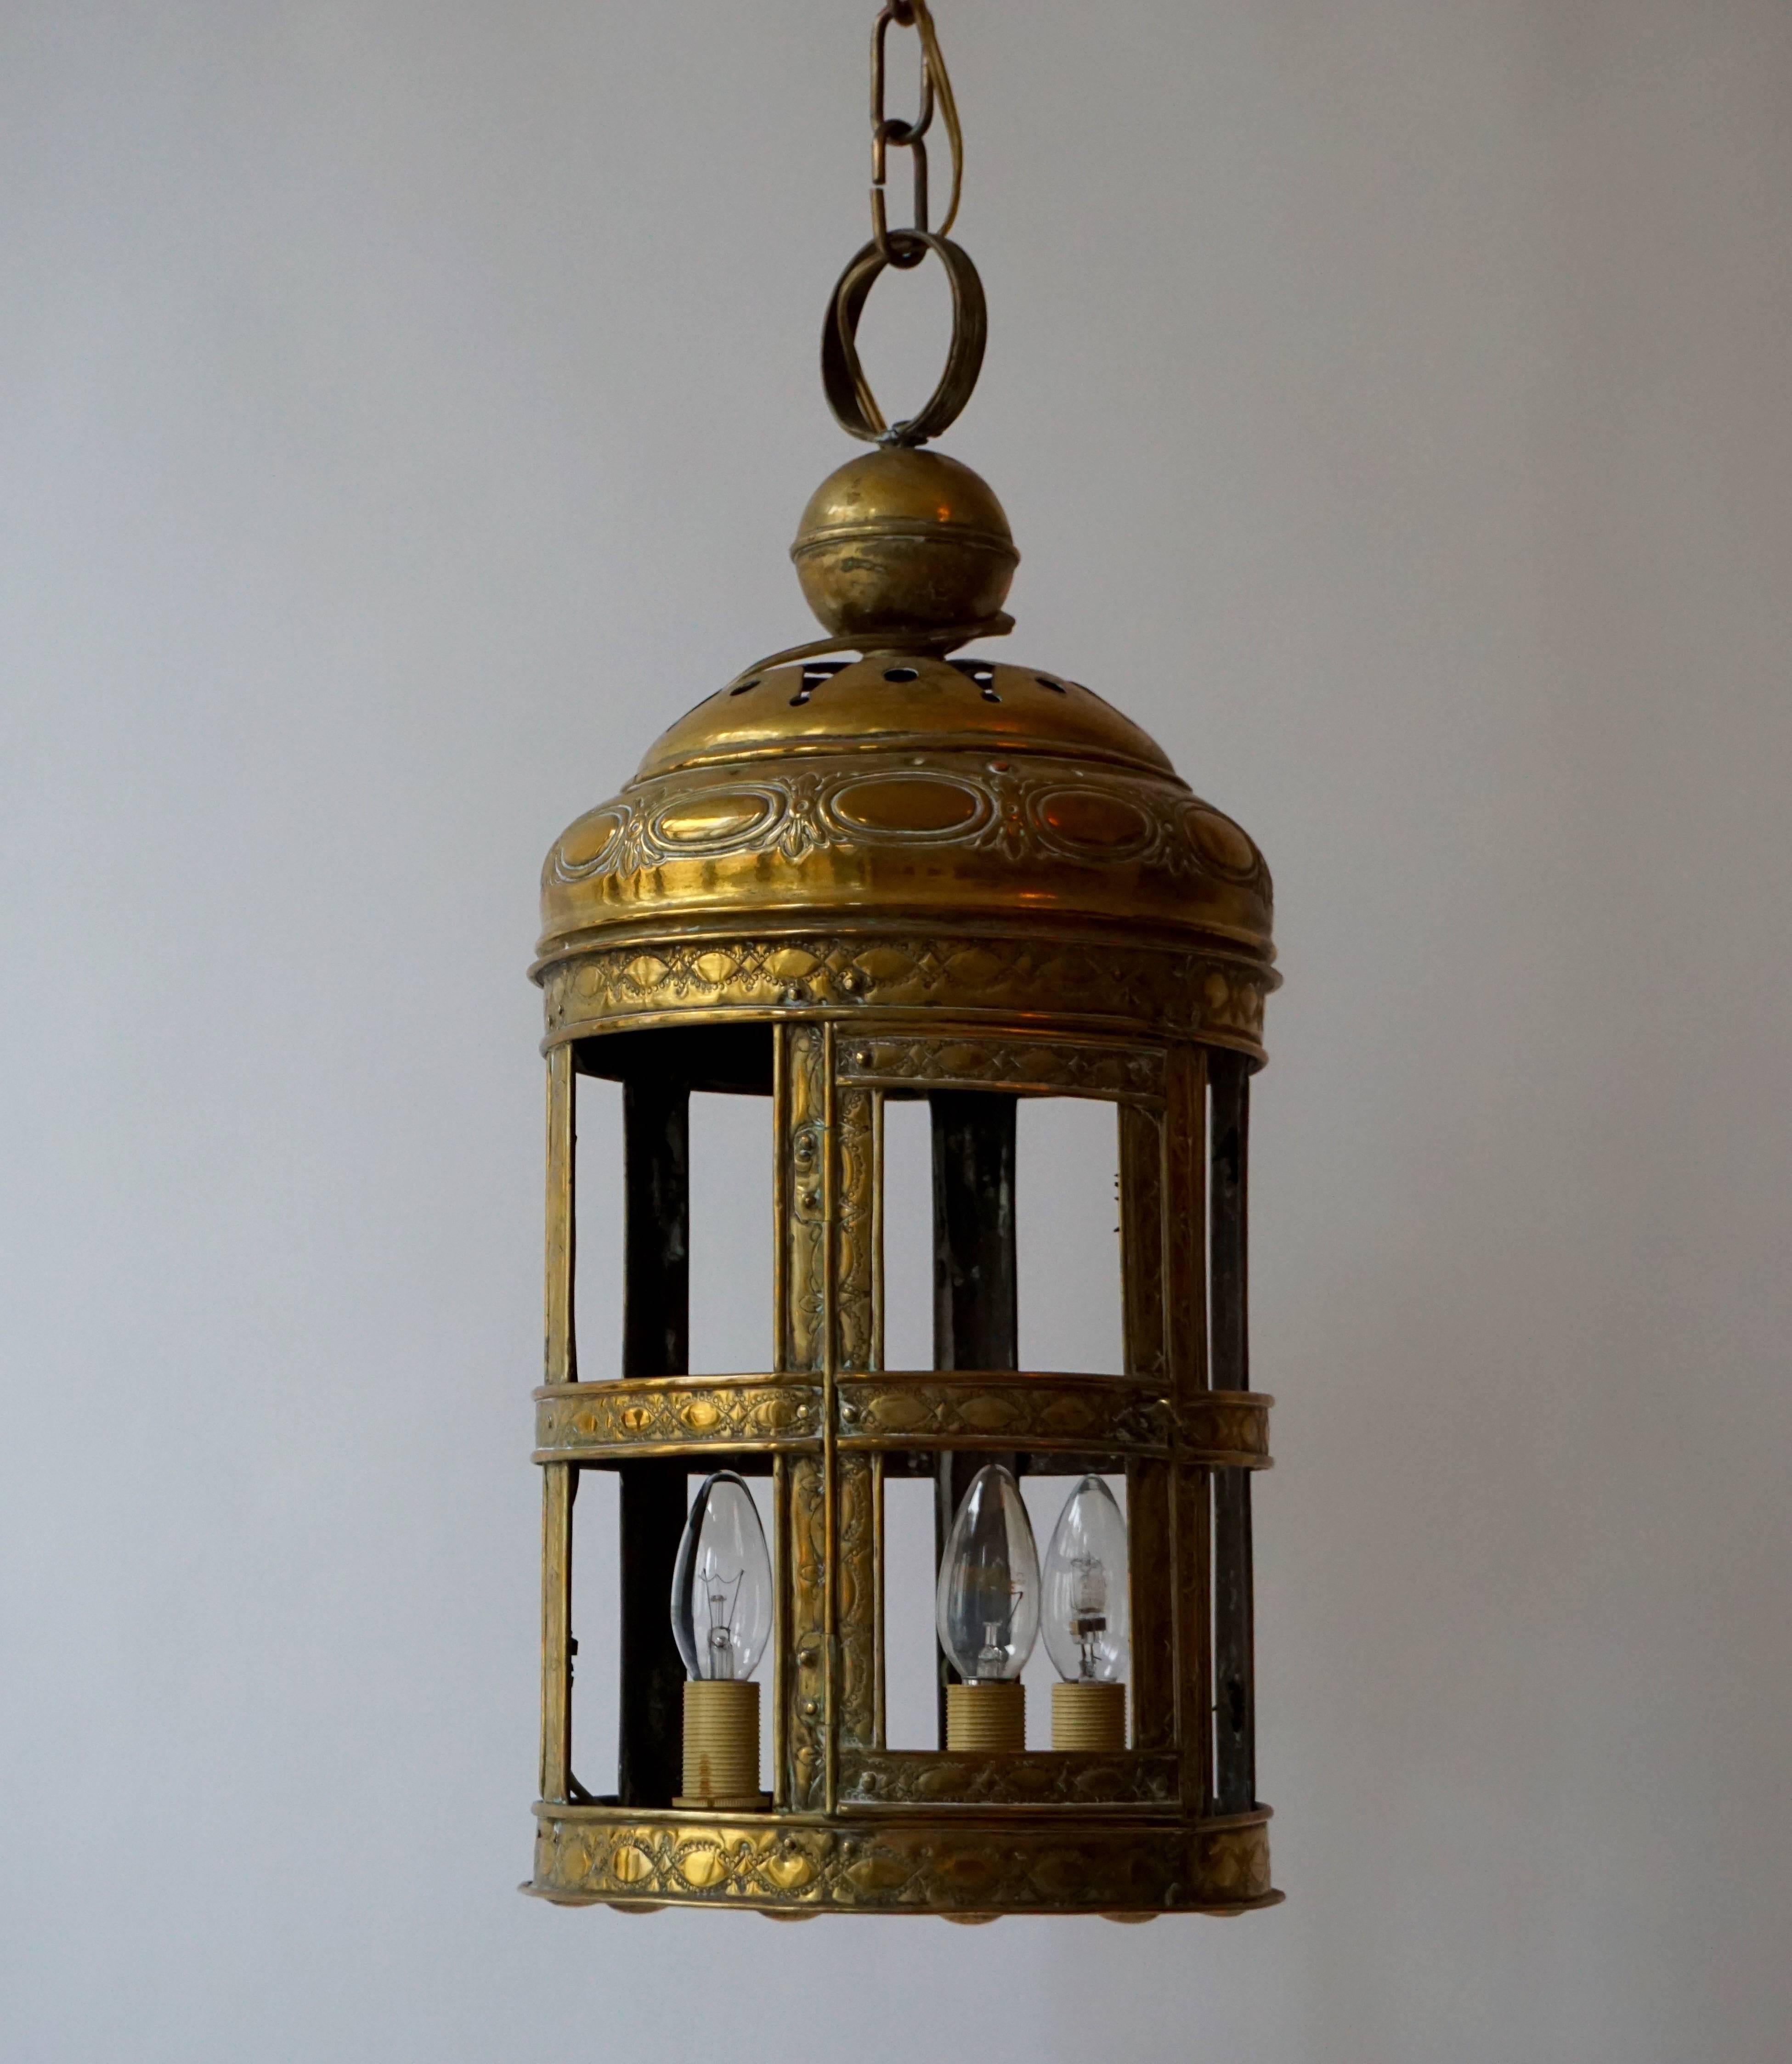 A beautiful original Arts & Crafts Lantern in brass. This rare and stunning lantern is of substantial proportions and features attractive decoration motifs hammered into the copper; a favourite technique of the Arts & Crafts period.
The lantern has